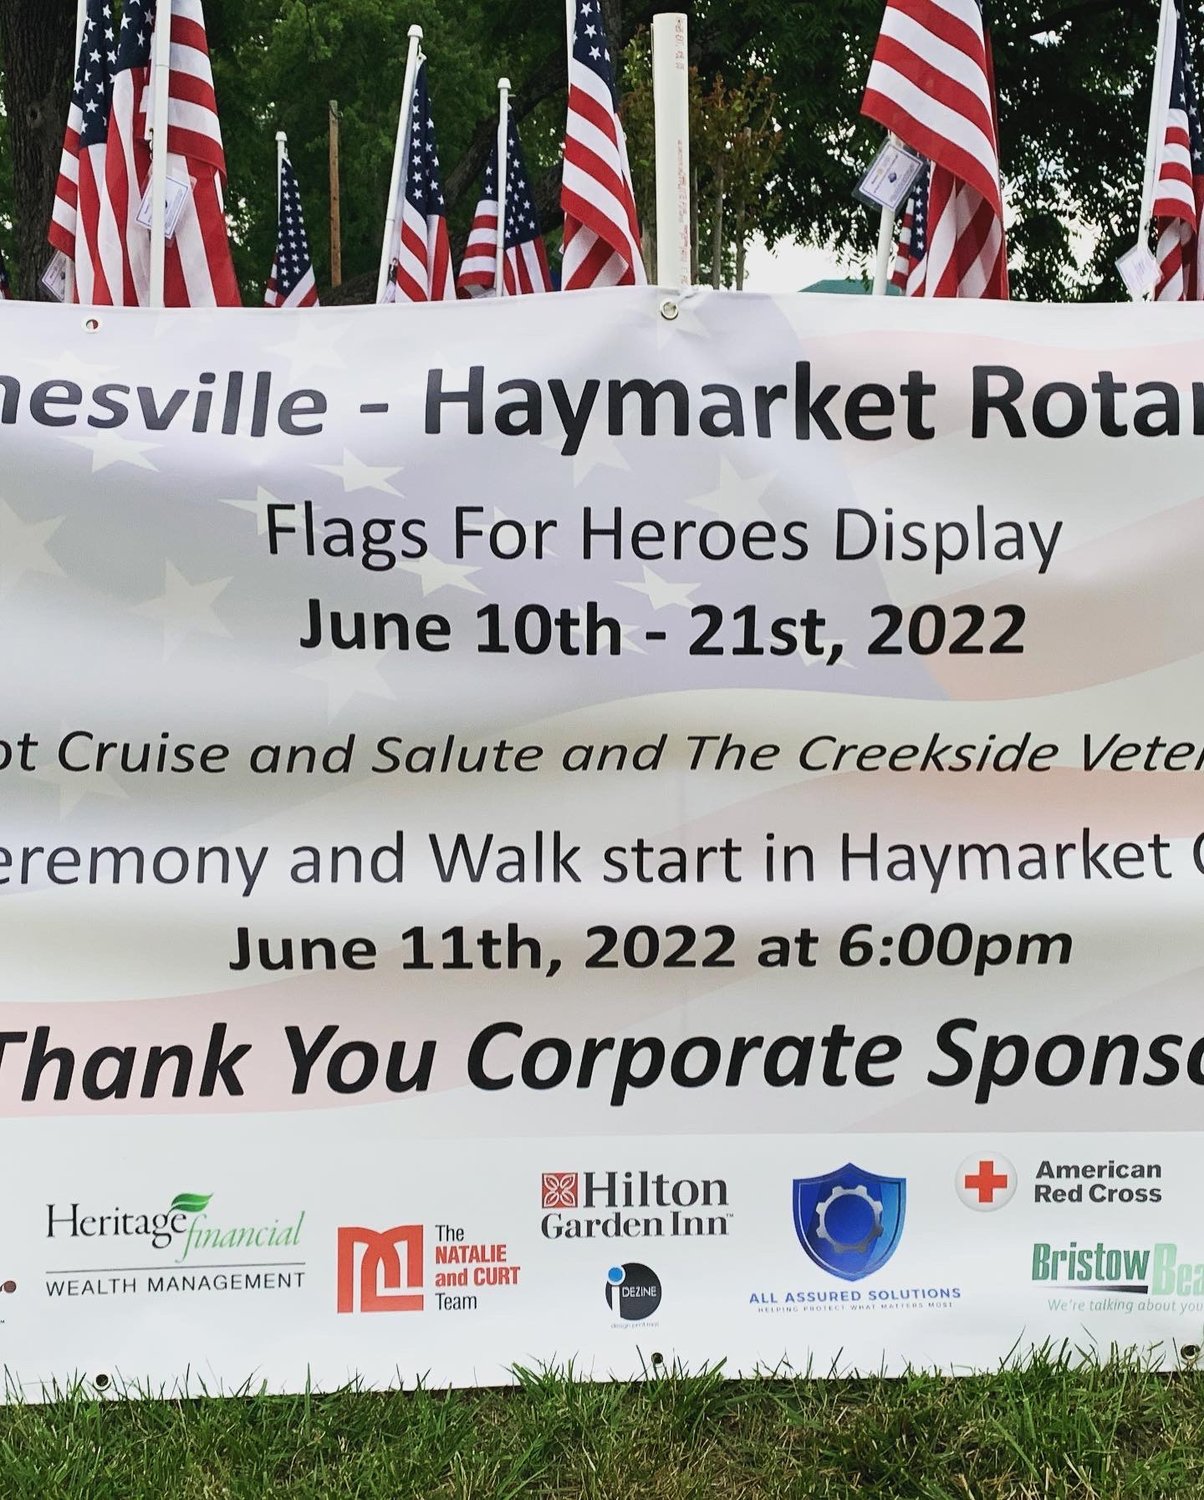 Signage recognizing premier sponsors of Flags for Heroes.